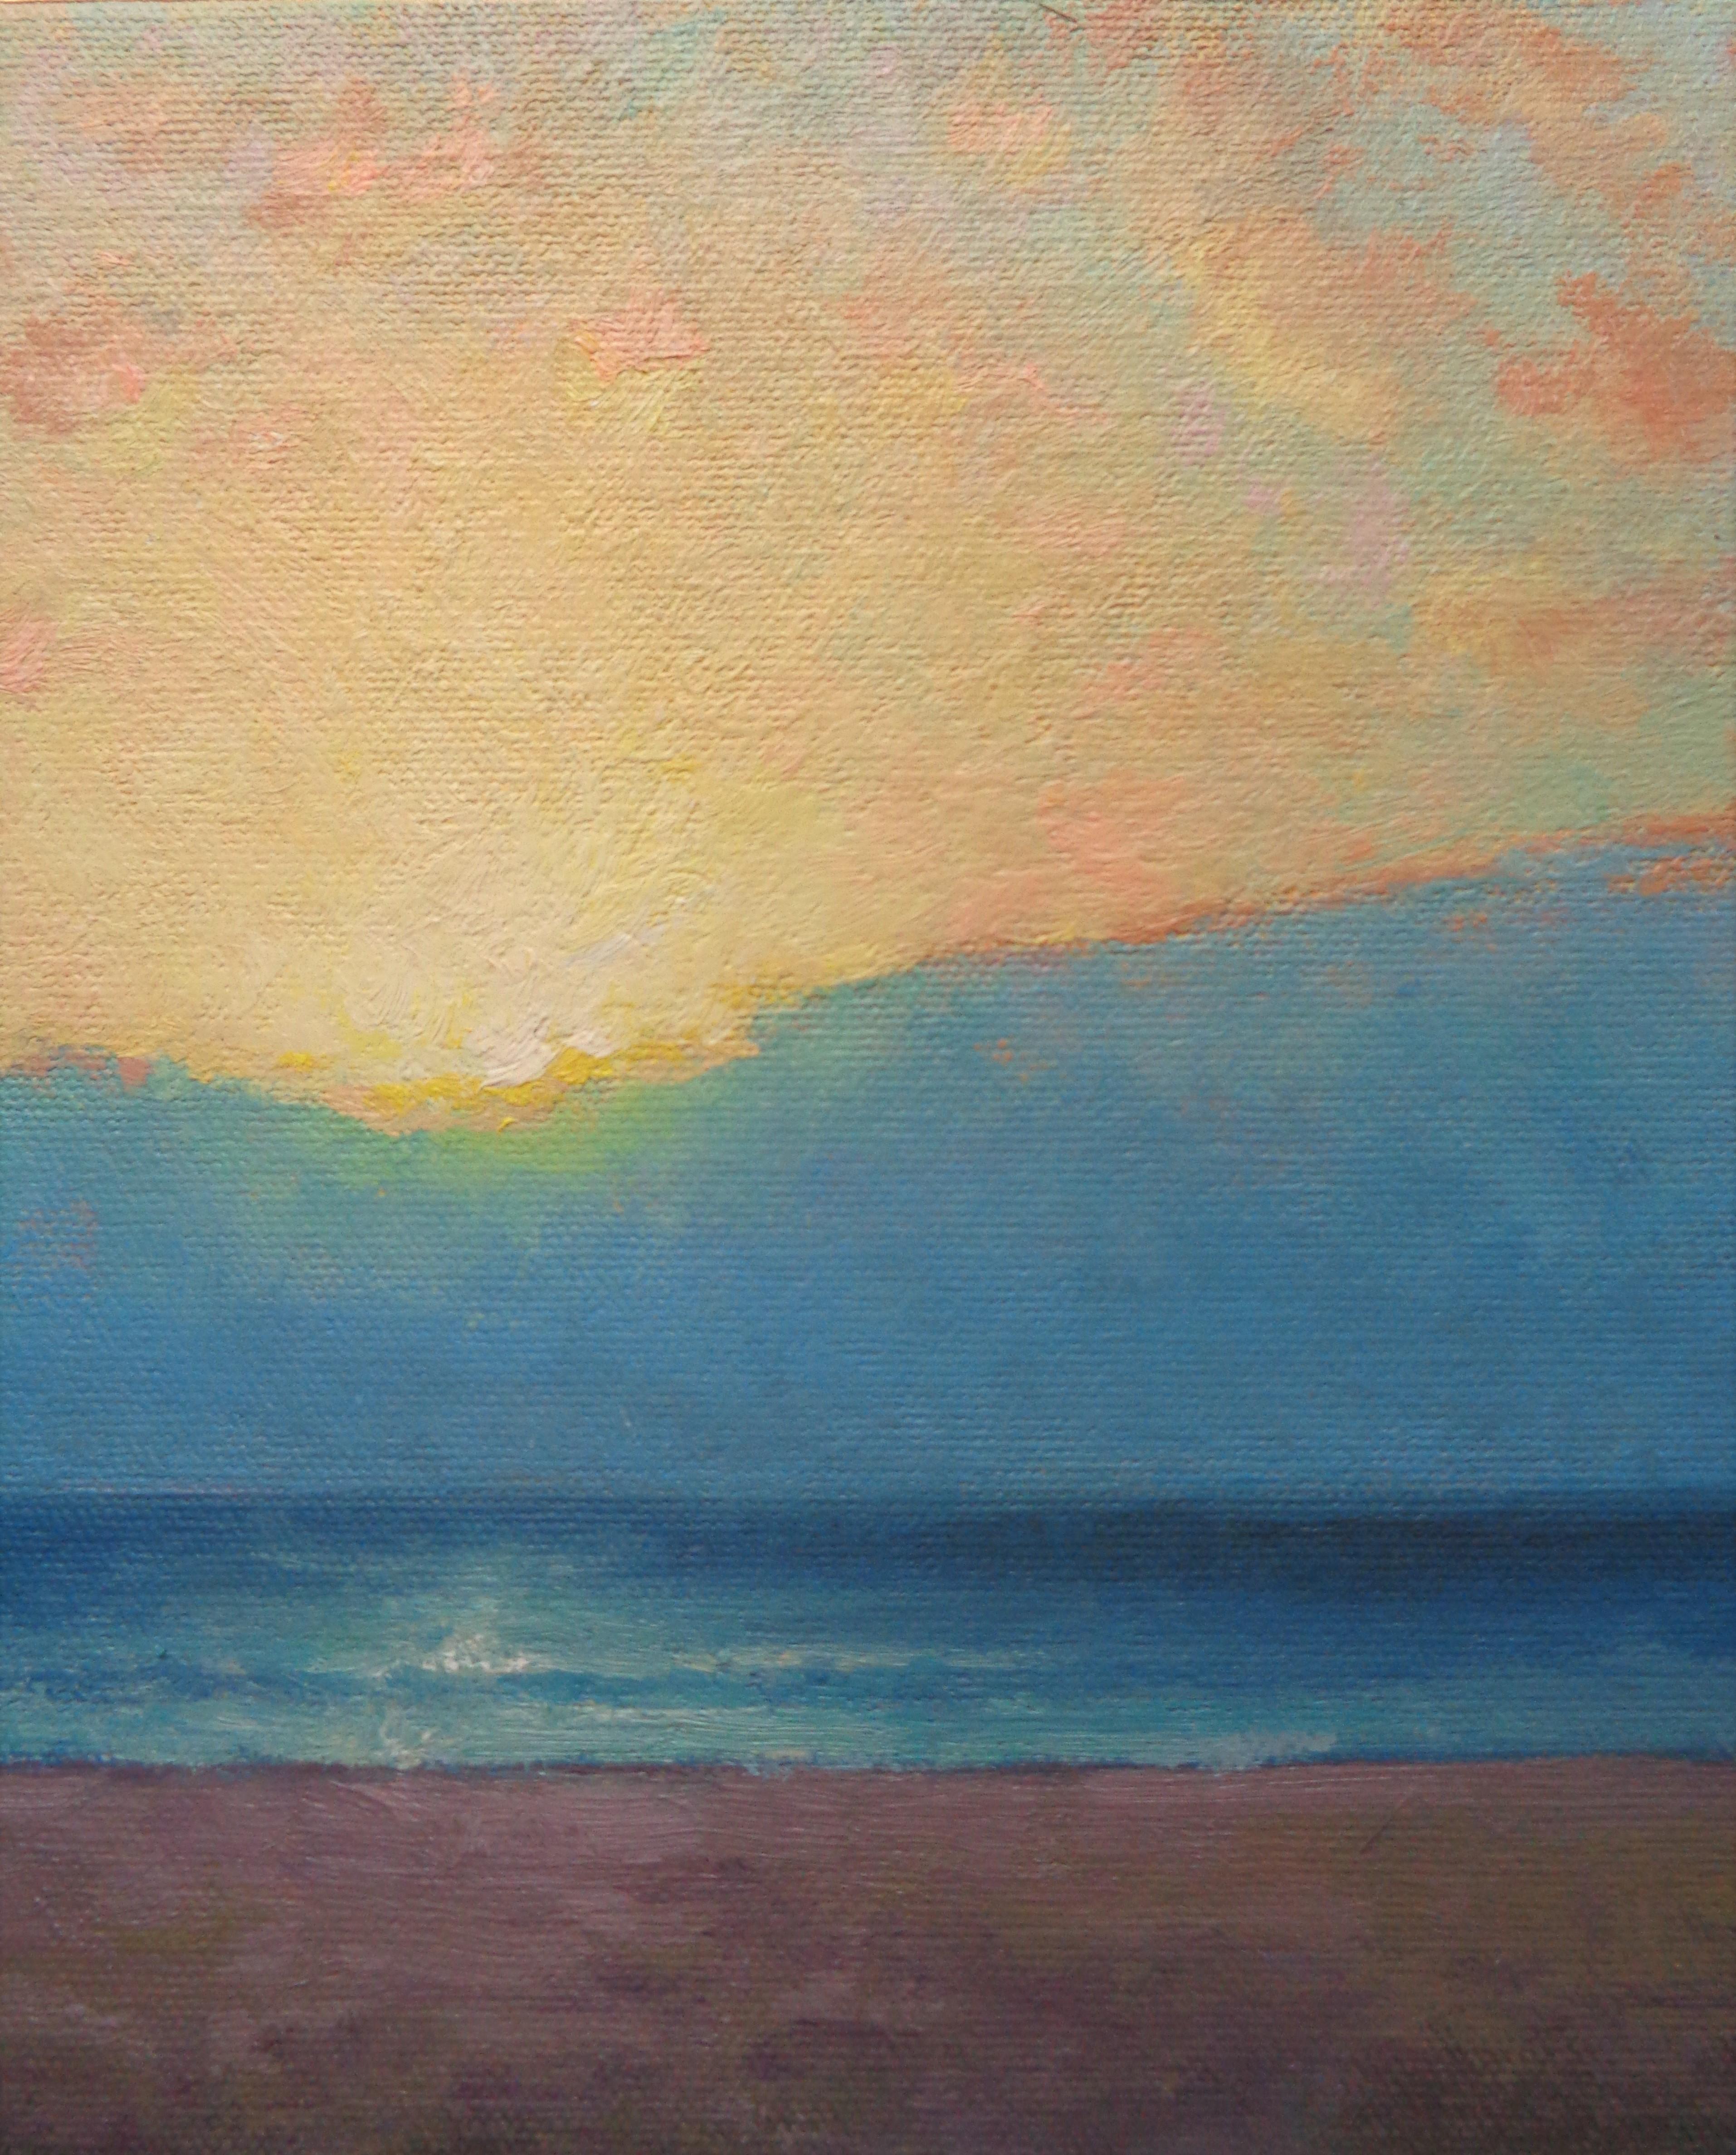 Beach Ocean Impressionistic Seascape Painting Michael Budden Morning Abstraction For Sale 3